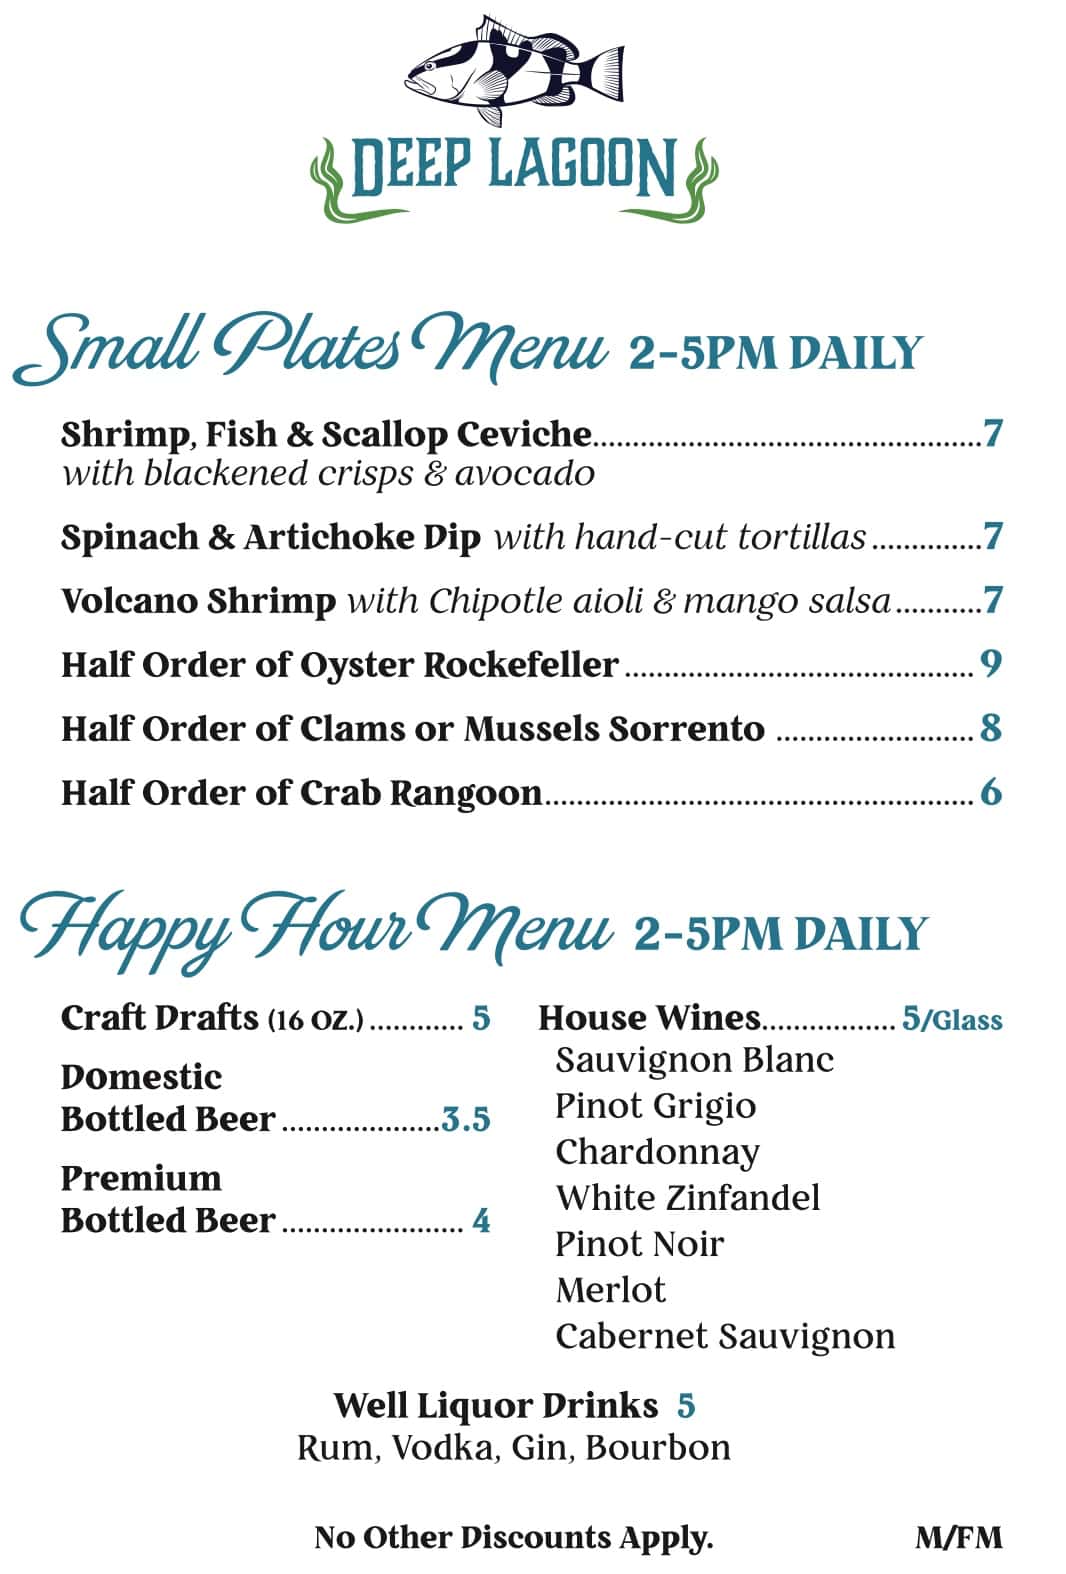 Deep Lagoon Seafood and Oyster House Small Plates and Happy Hour Menu